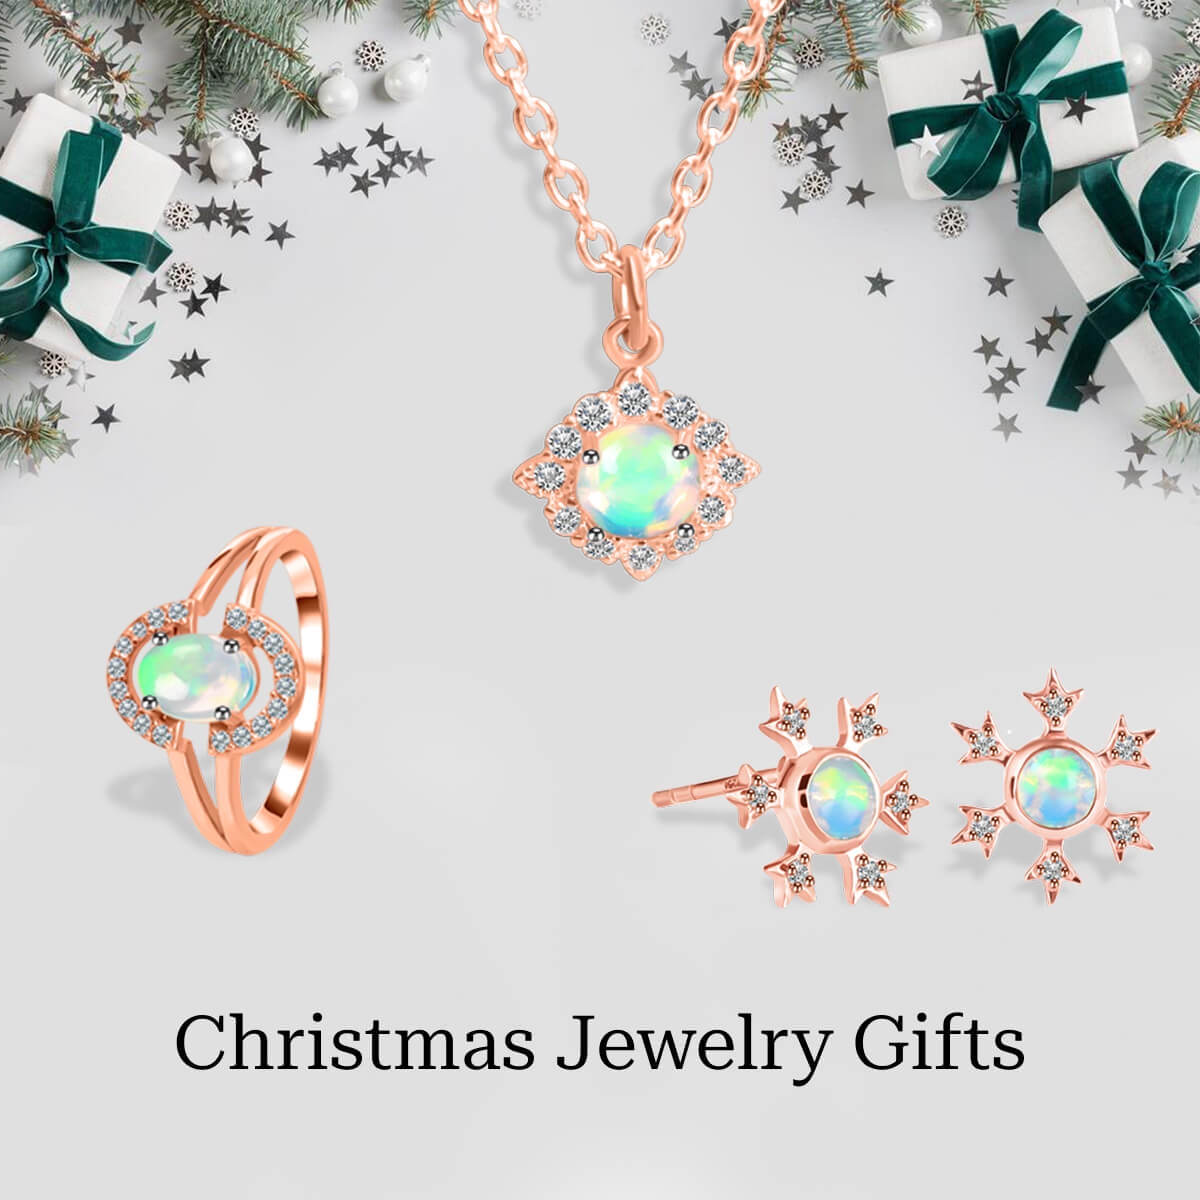 8 precious jewels to bedazzle your love this Christmas